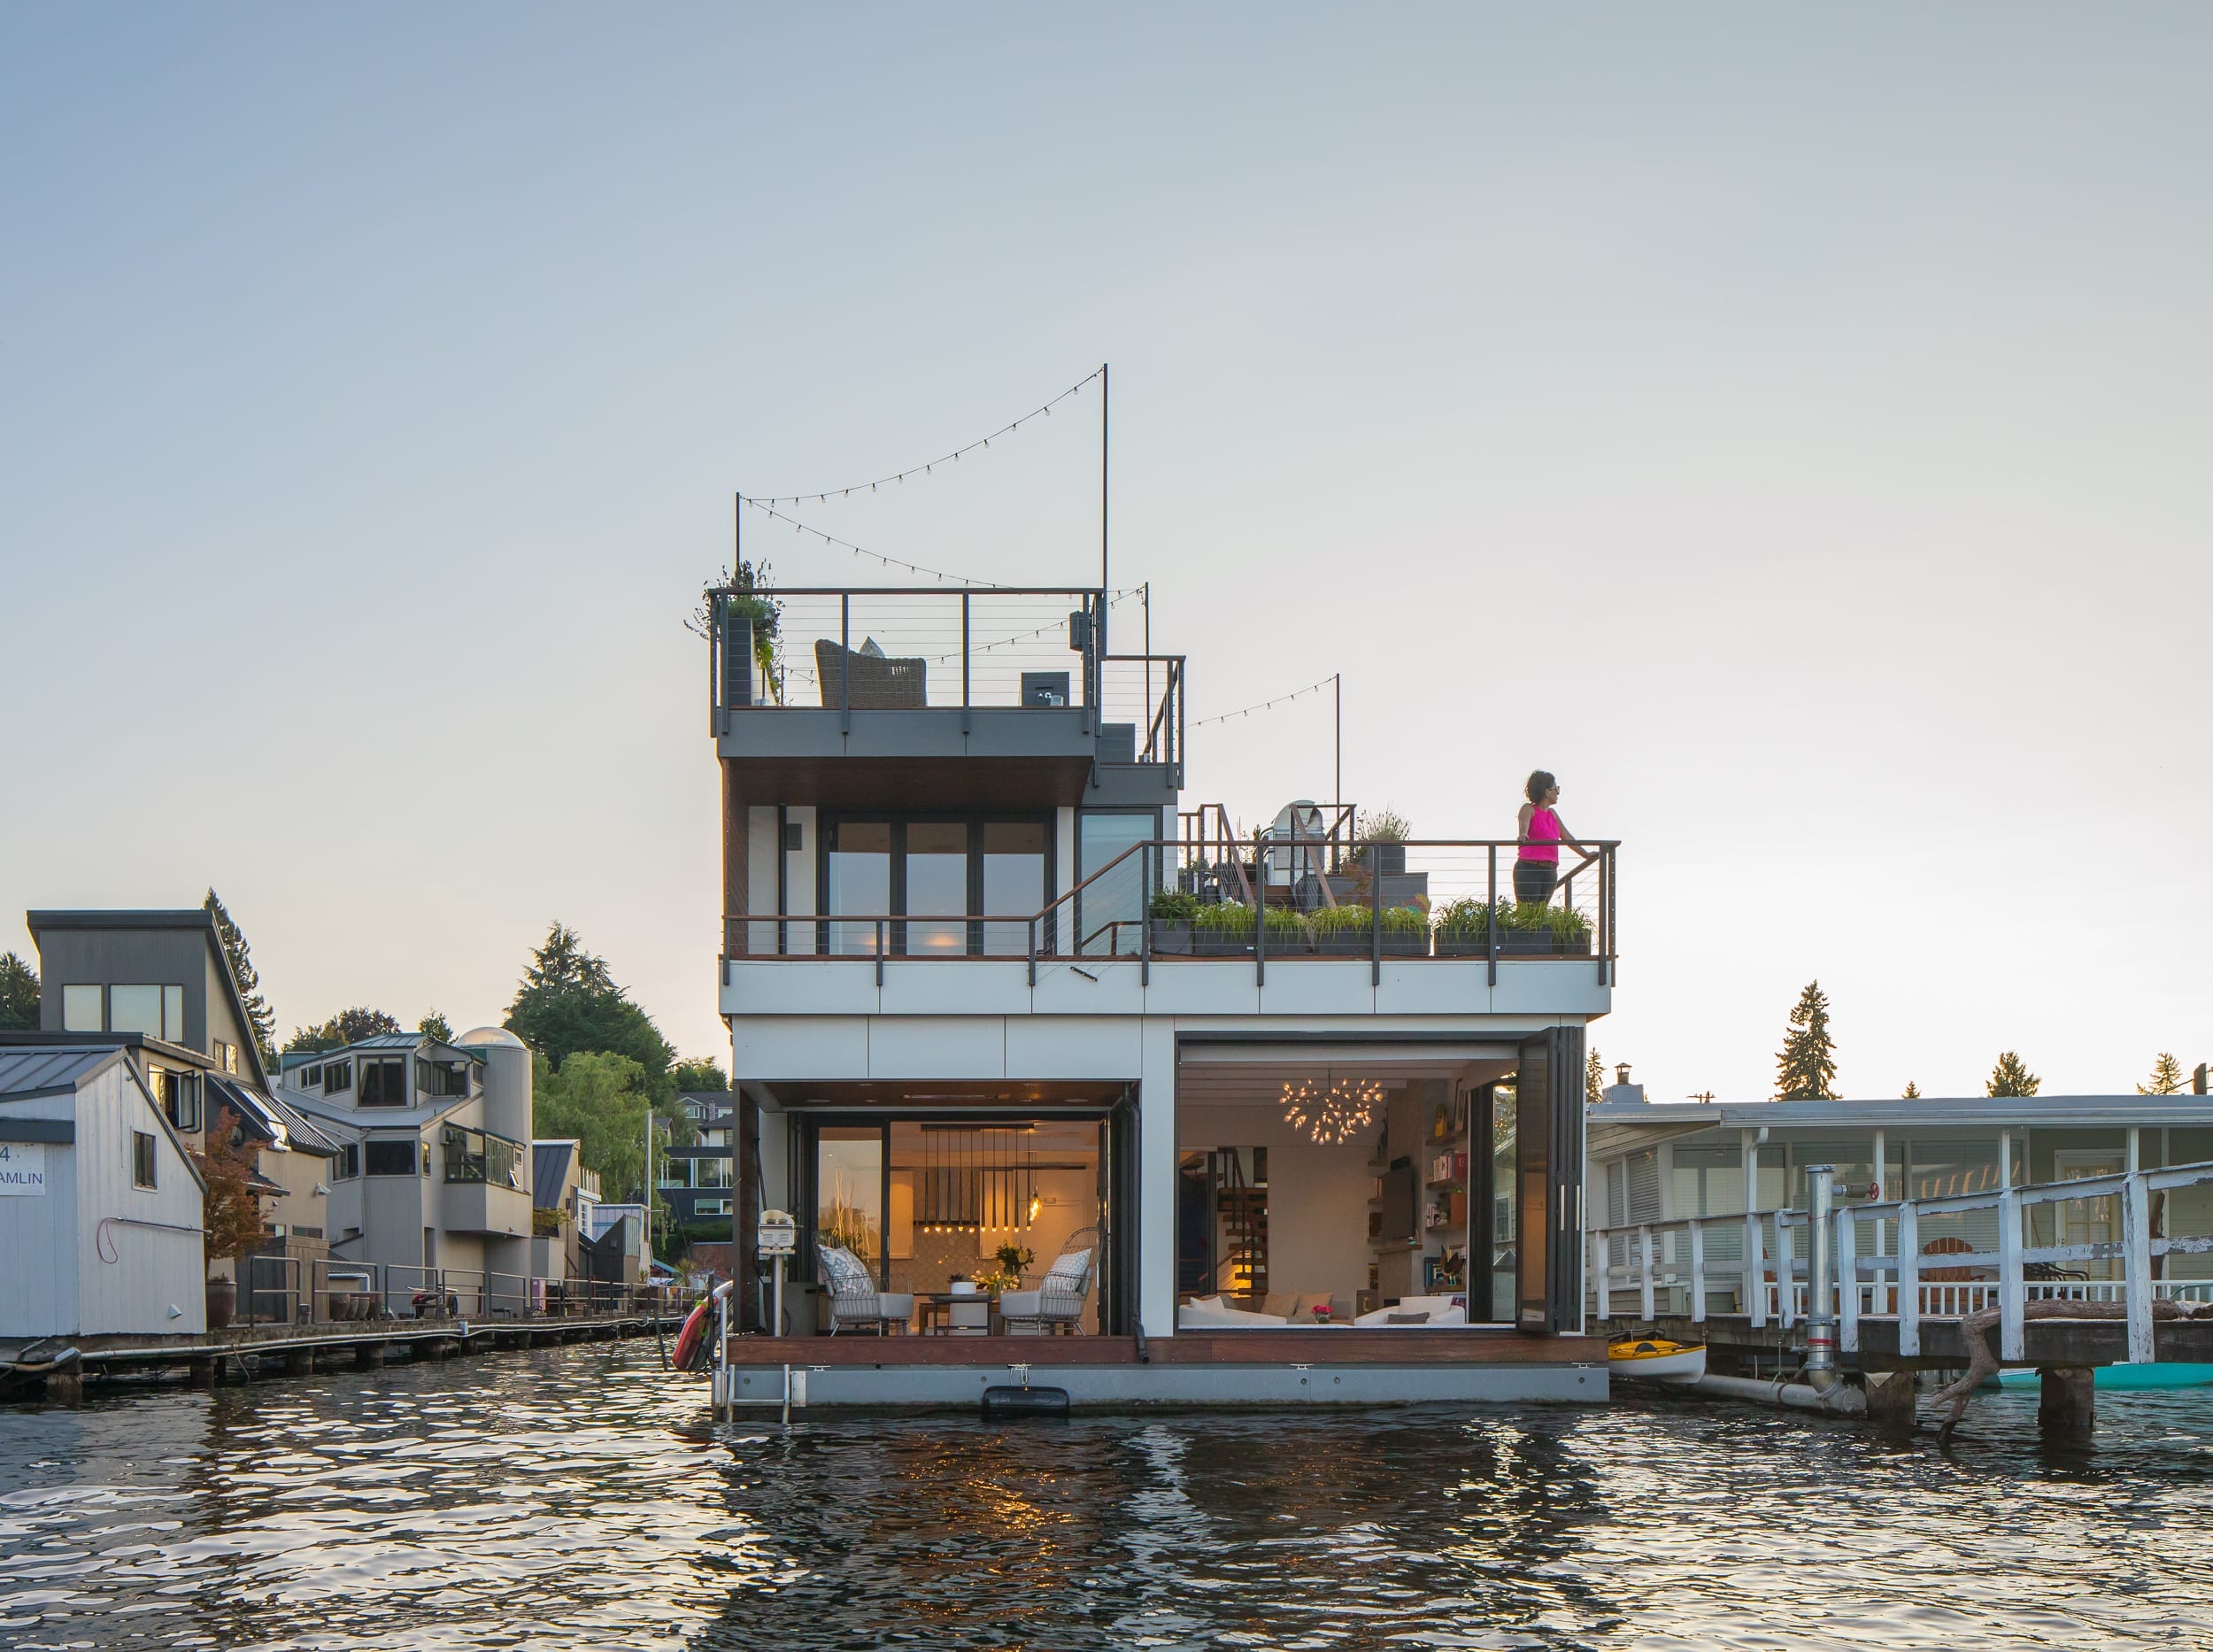 A modern houseboat designed and built by a skilled carpenter, floating on the water with a person enjoying the view from the top.